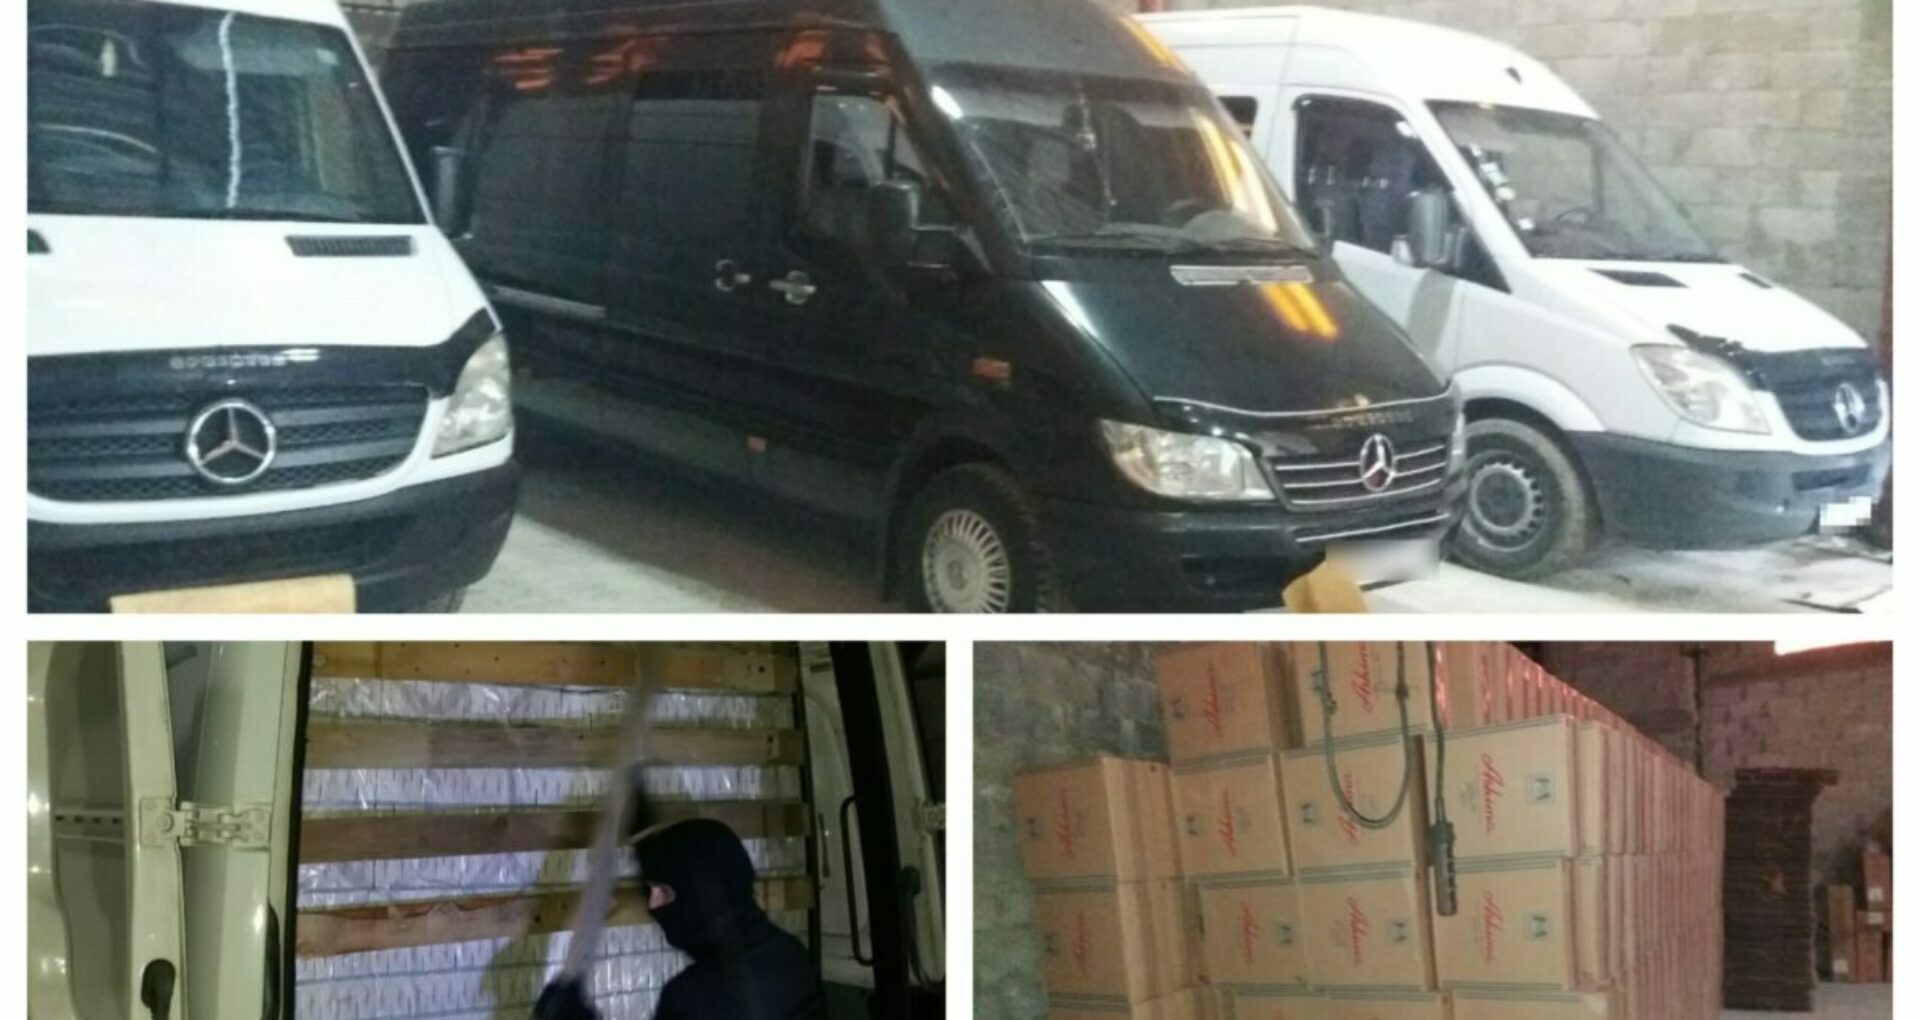 PHOTO/ Moldovan Cigarette Smuggling Operation Stubbed Out